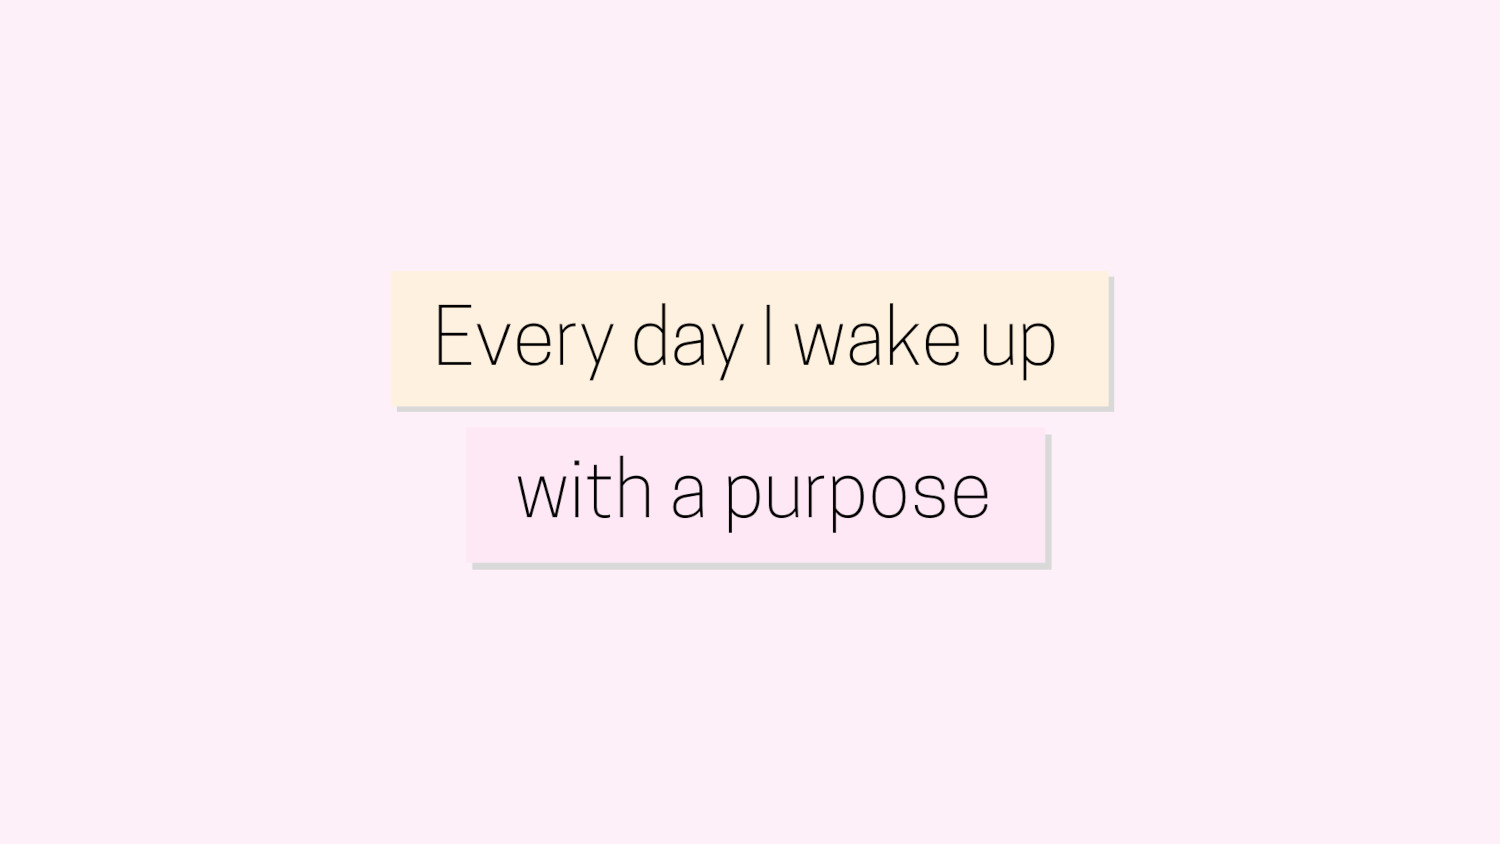 Every day I wake up with a purpose